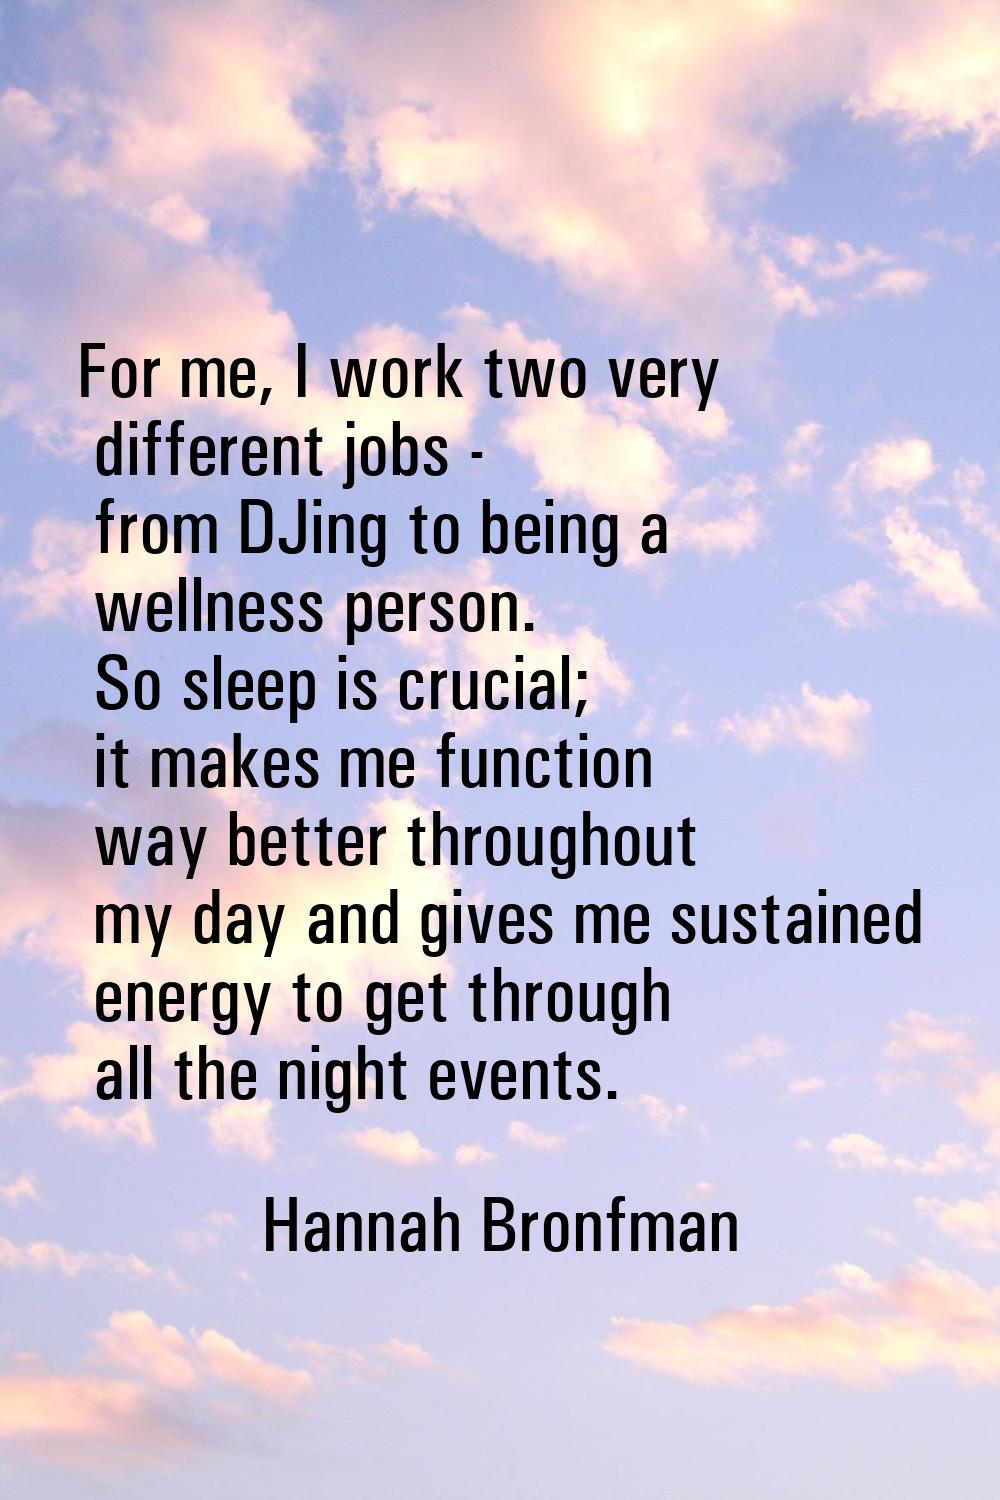 For me, I work two very different jobs - from DJing to being a wellness person. So sleep is crucial